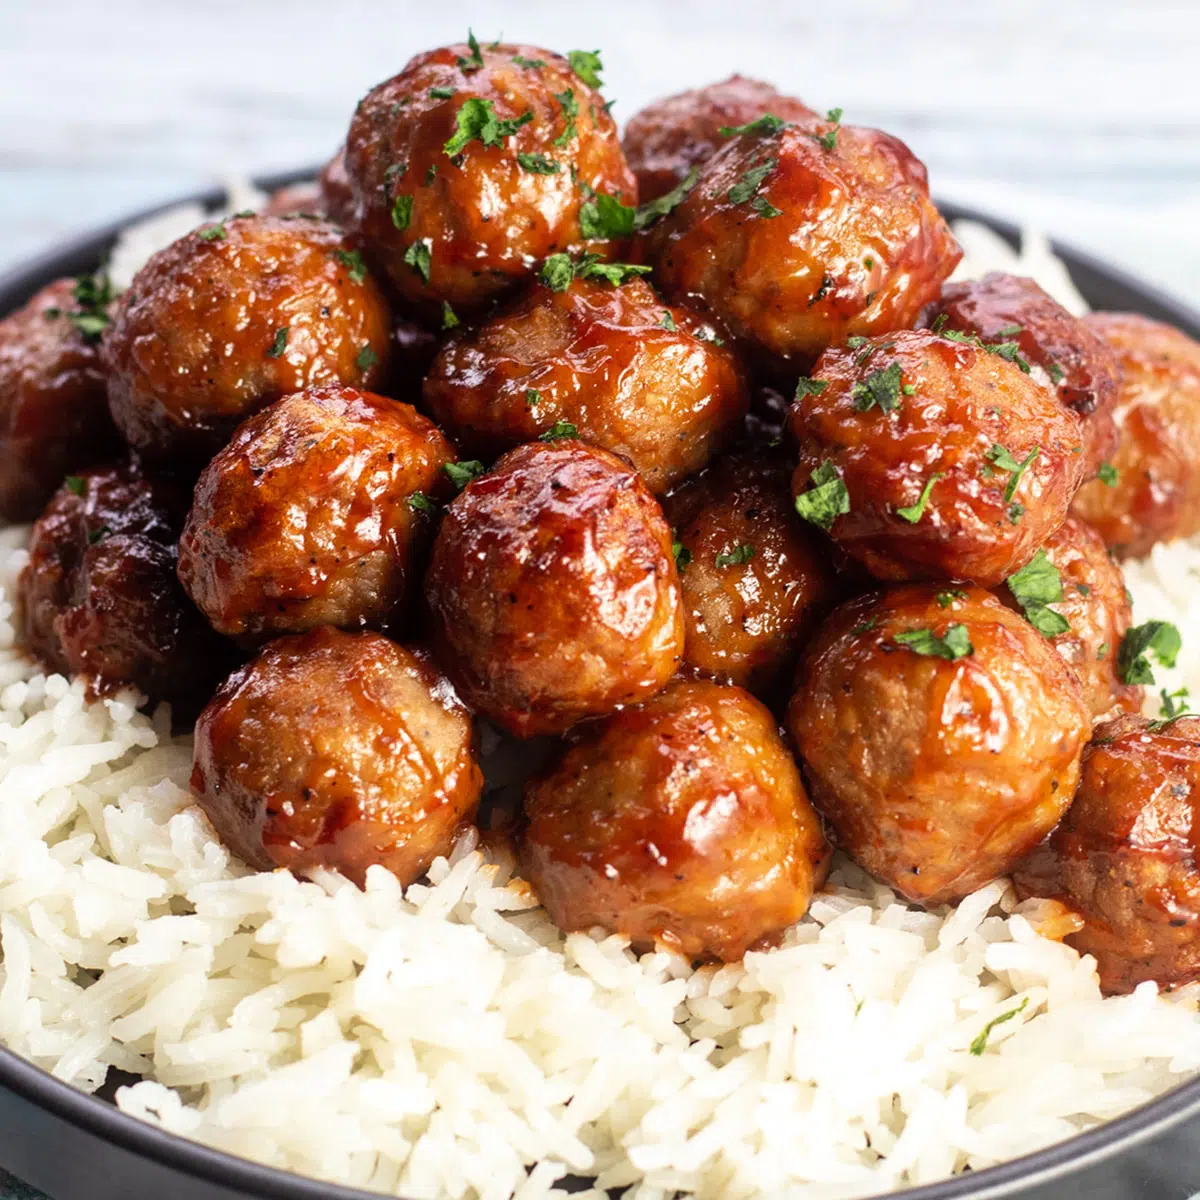 Square image of meatballs over rice on a plate.